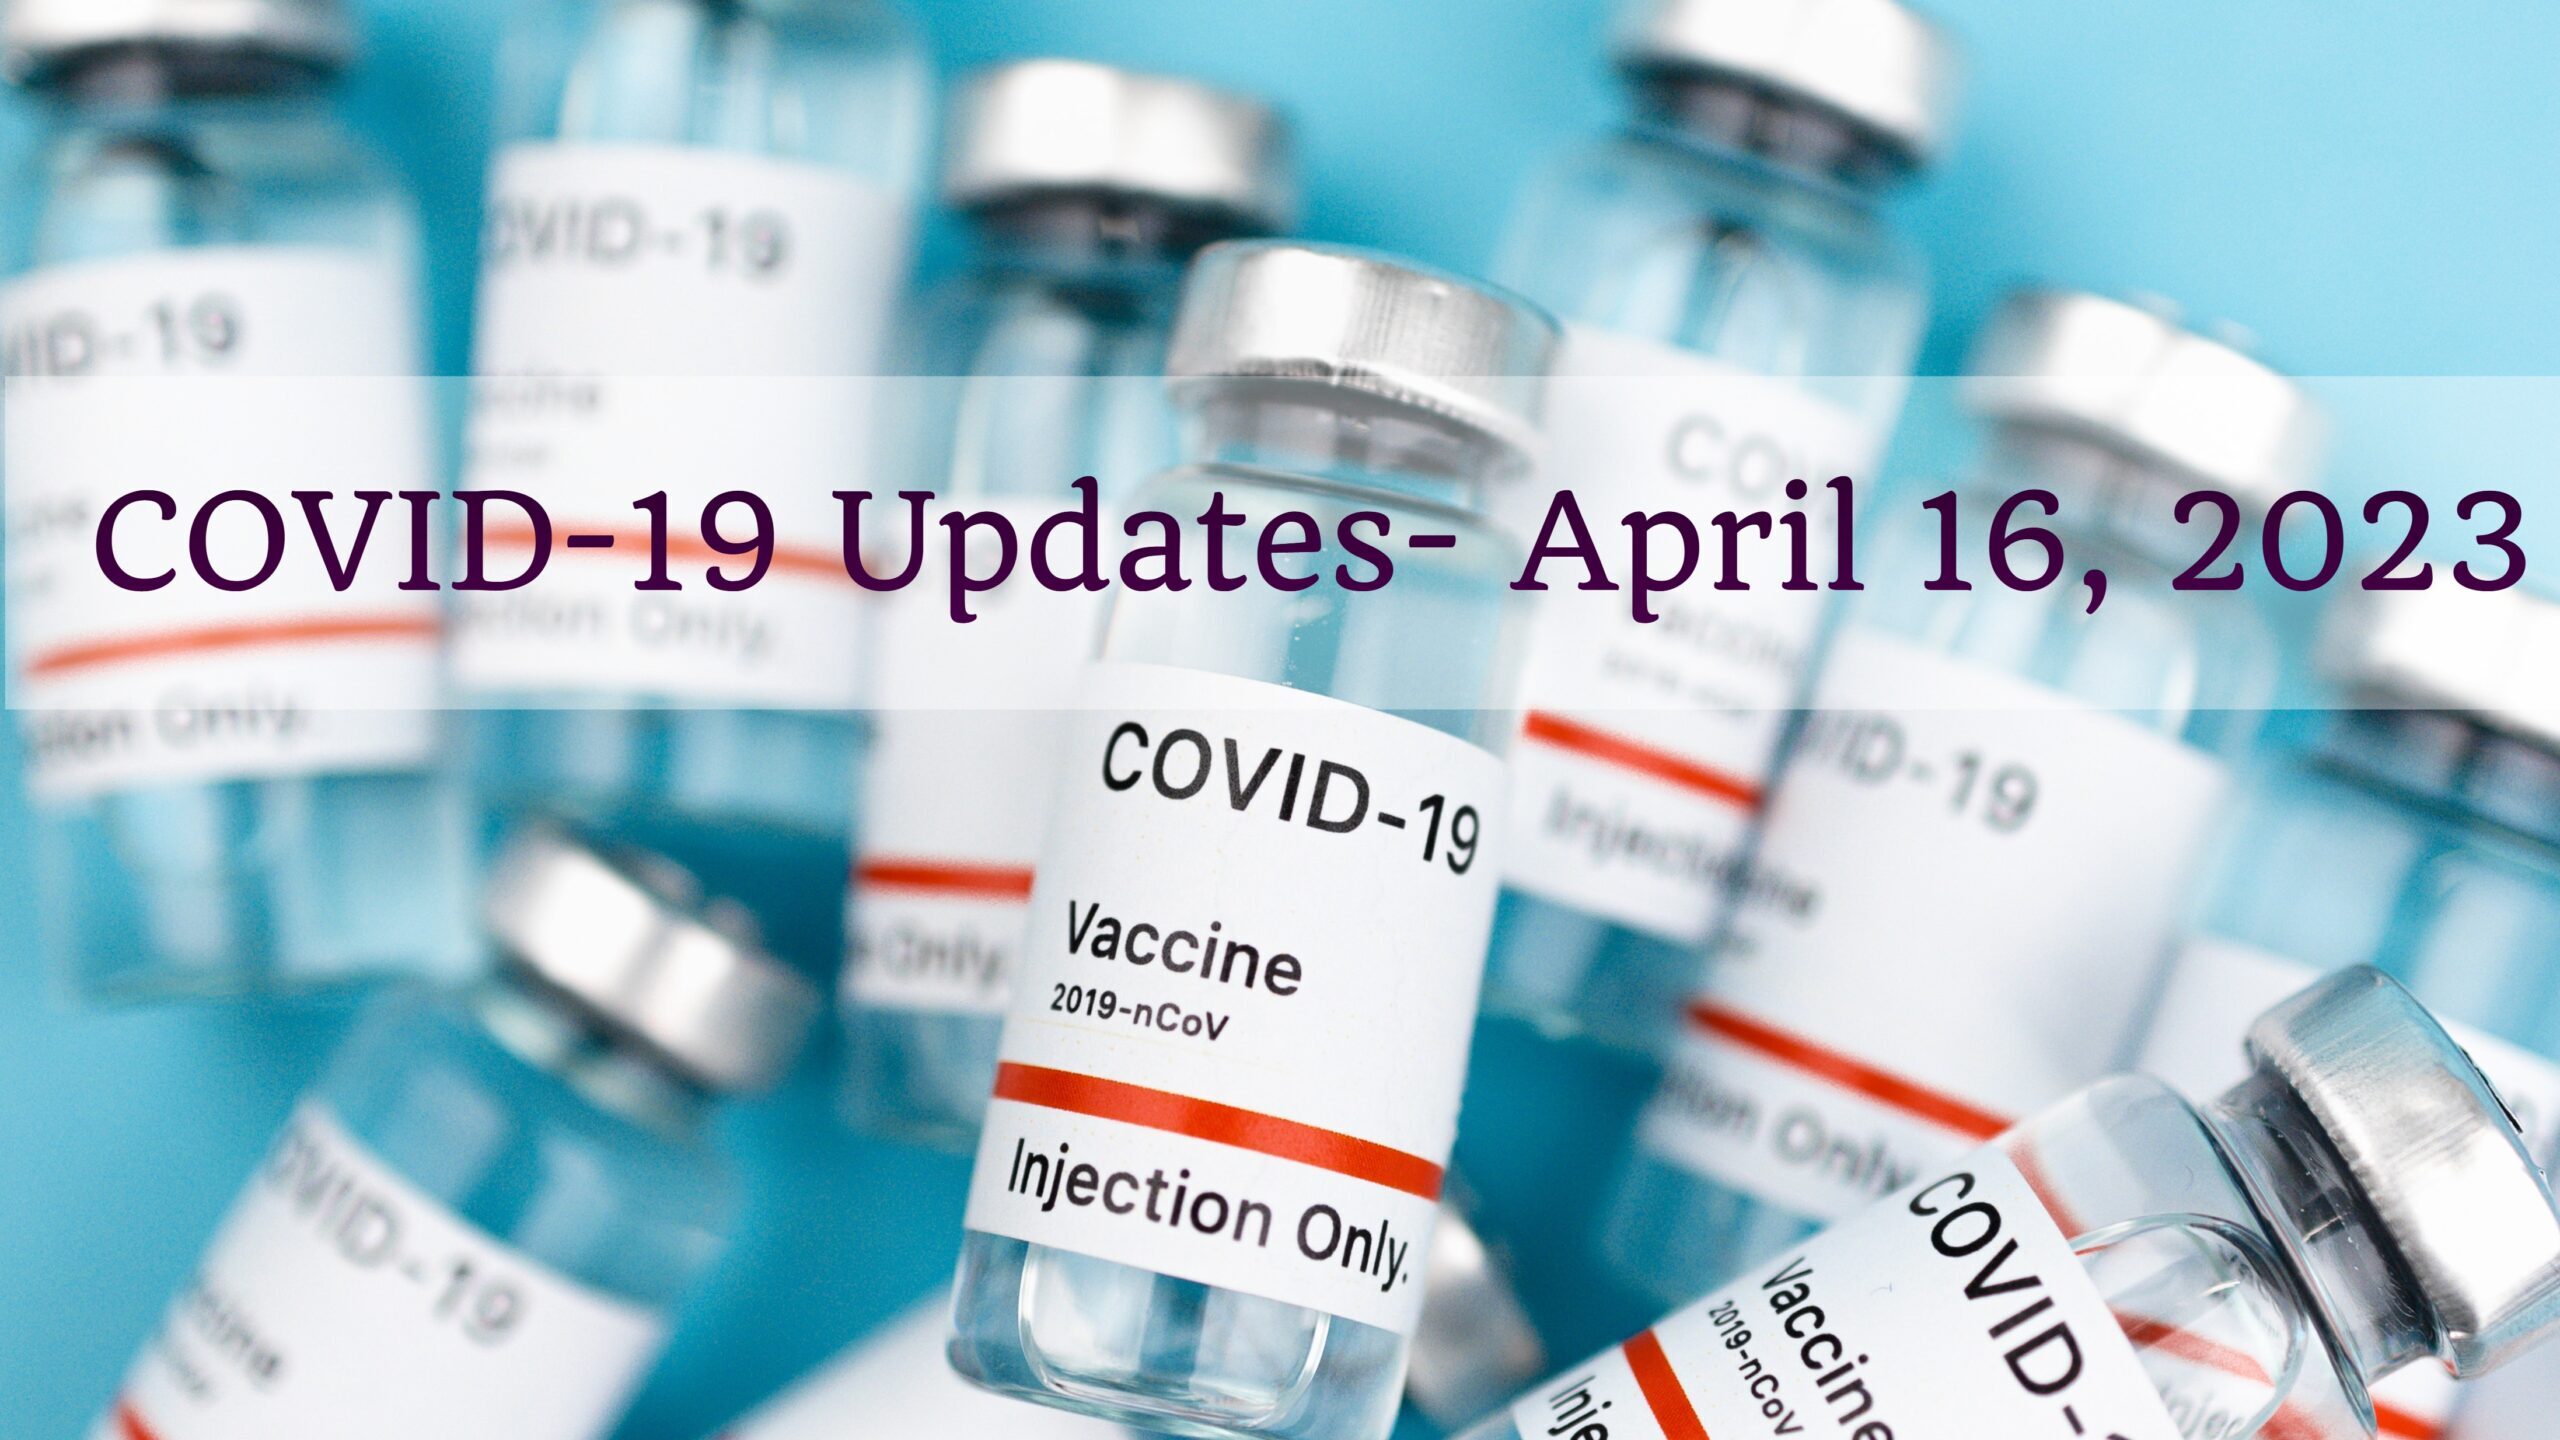 Latest COVID-19 Update: Active Caseload at 57,542, Total Vaccine Doses Cross 220 Crore